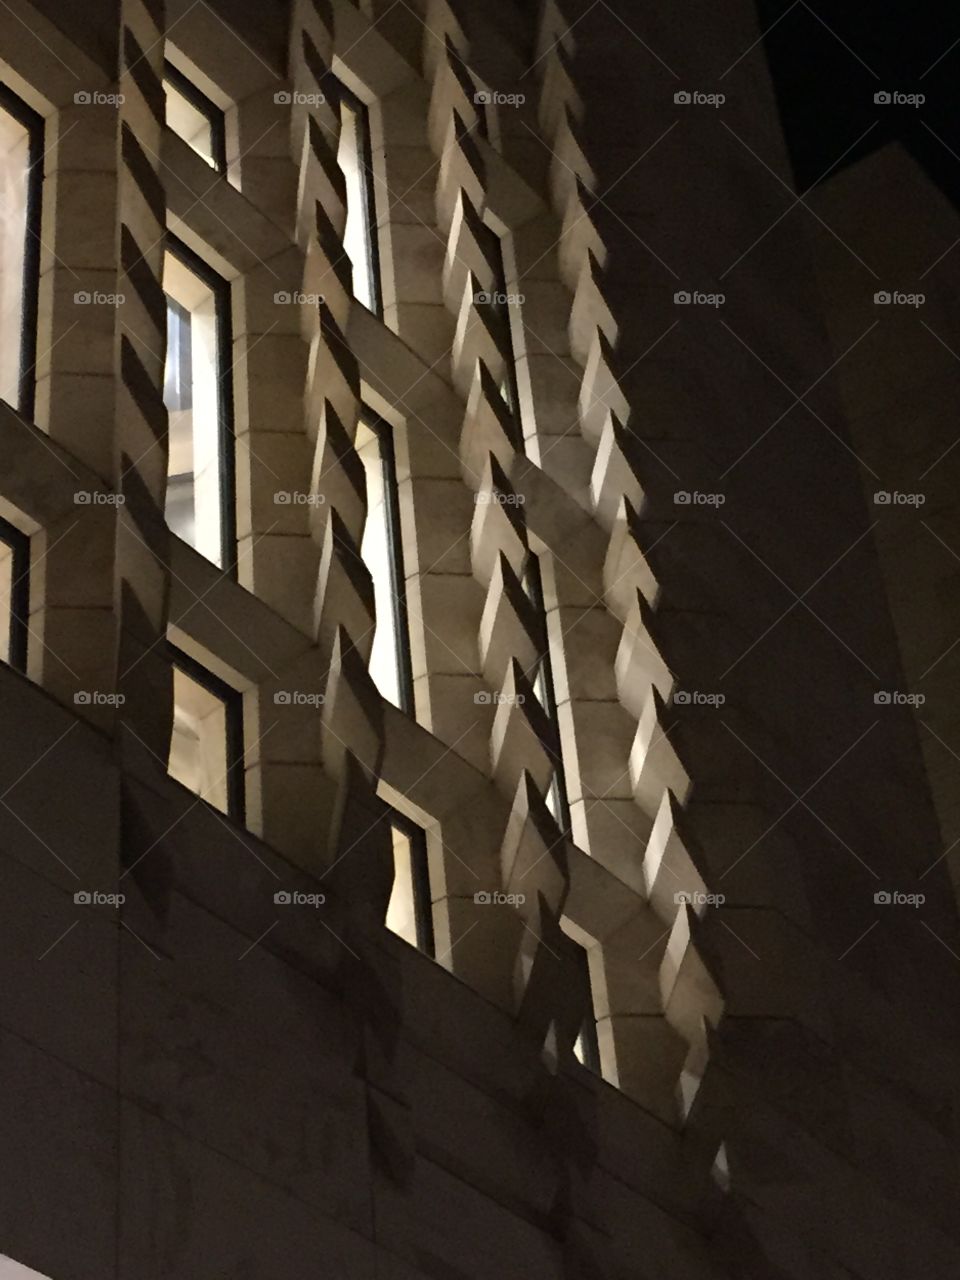 Windows around the world. Illuminated windows at night, in the new and controversial Parliament Building in the Capital City of Valletta in Malta.